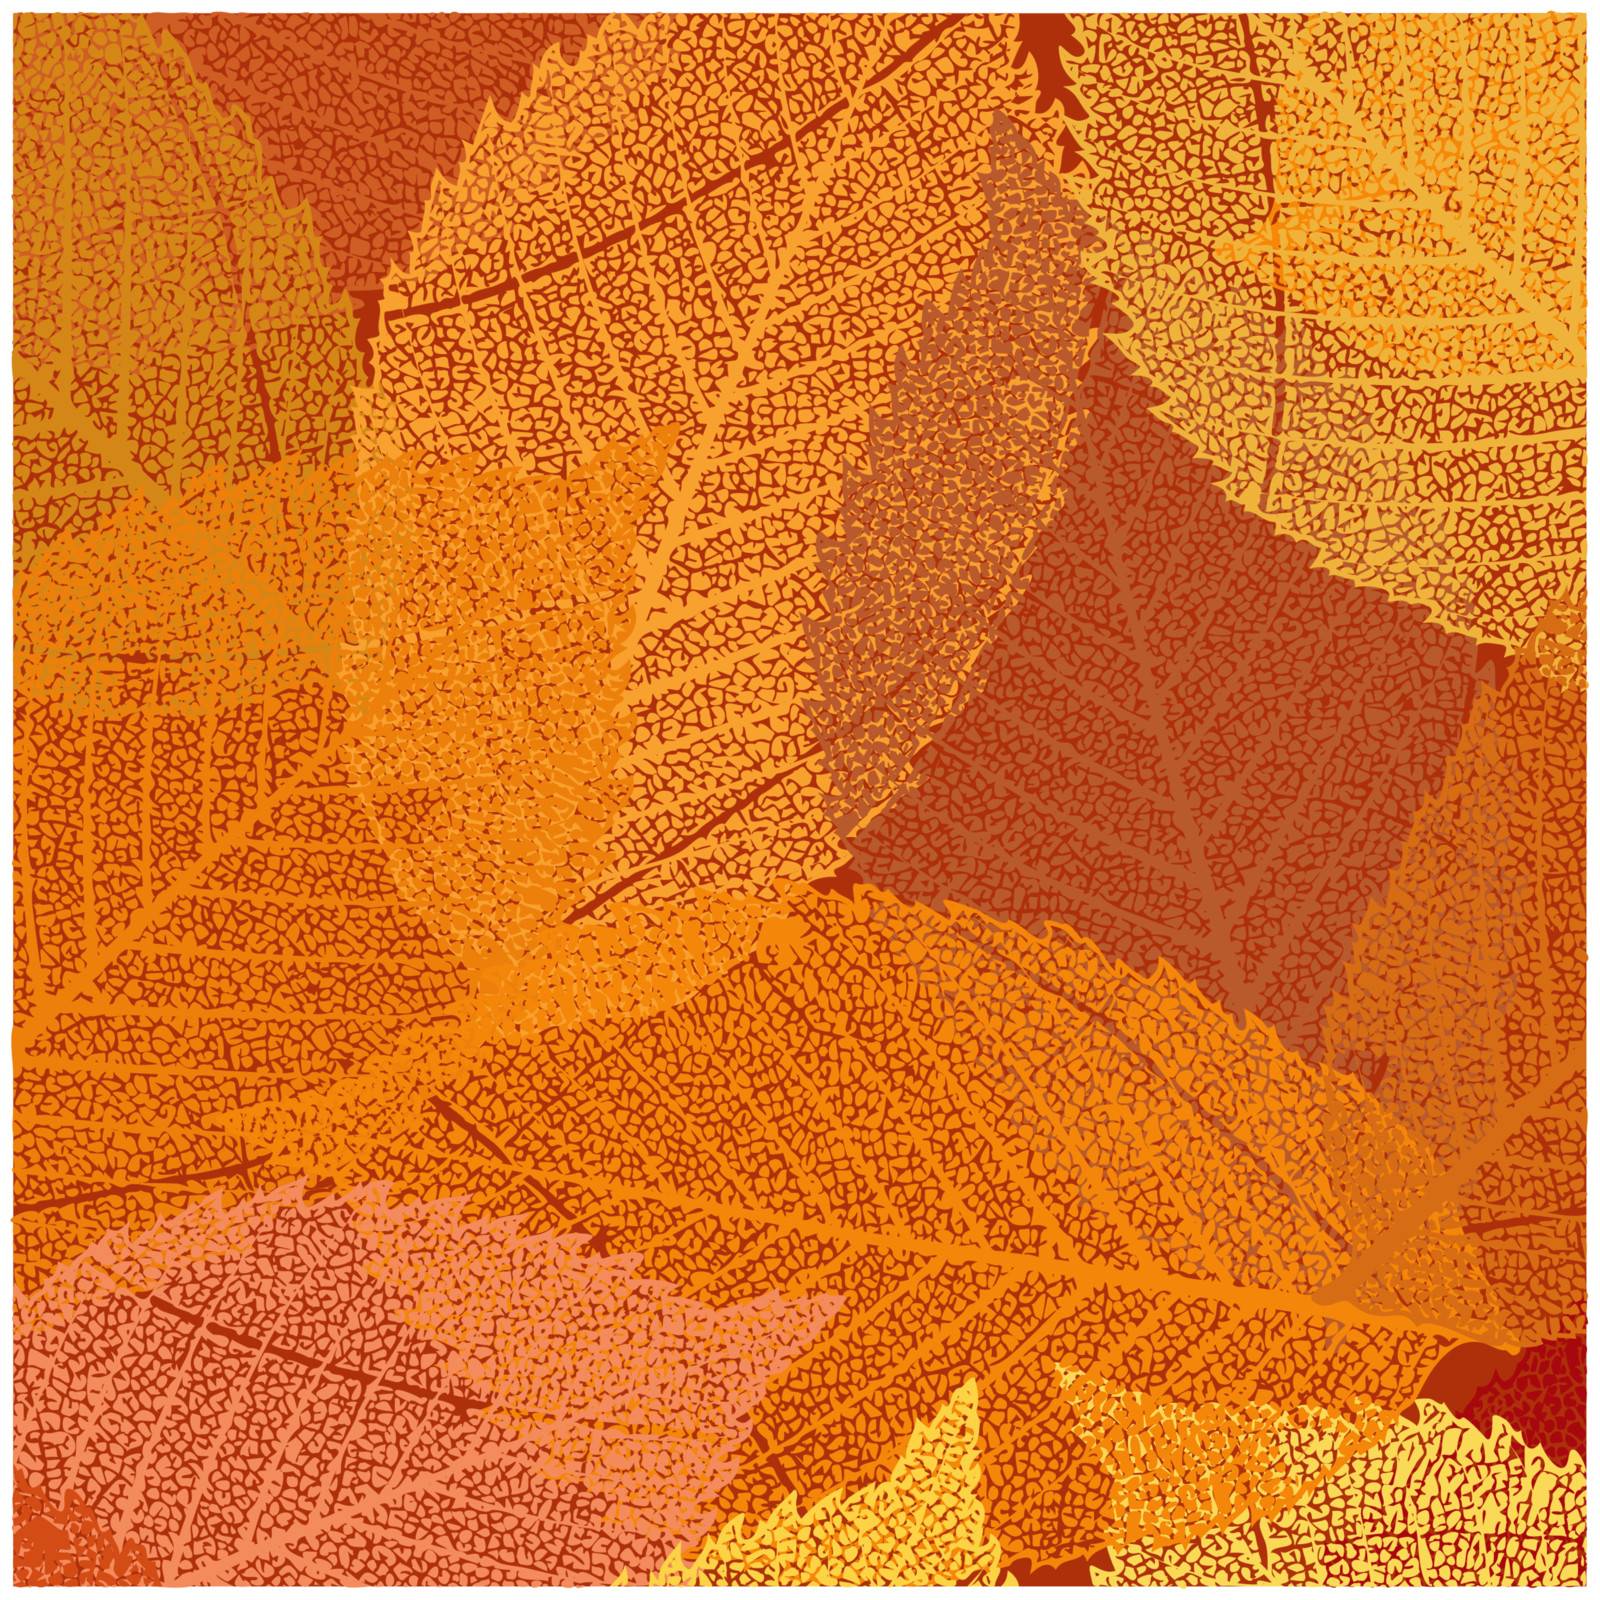 Dry autumn leaves template. EPS 8 vector file included